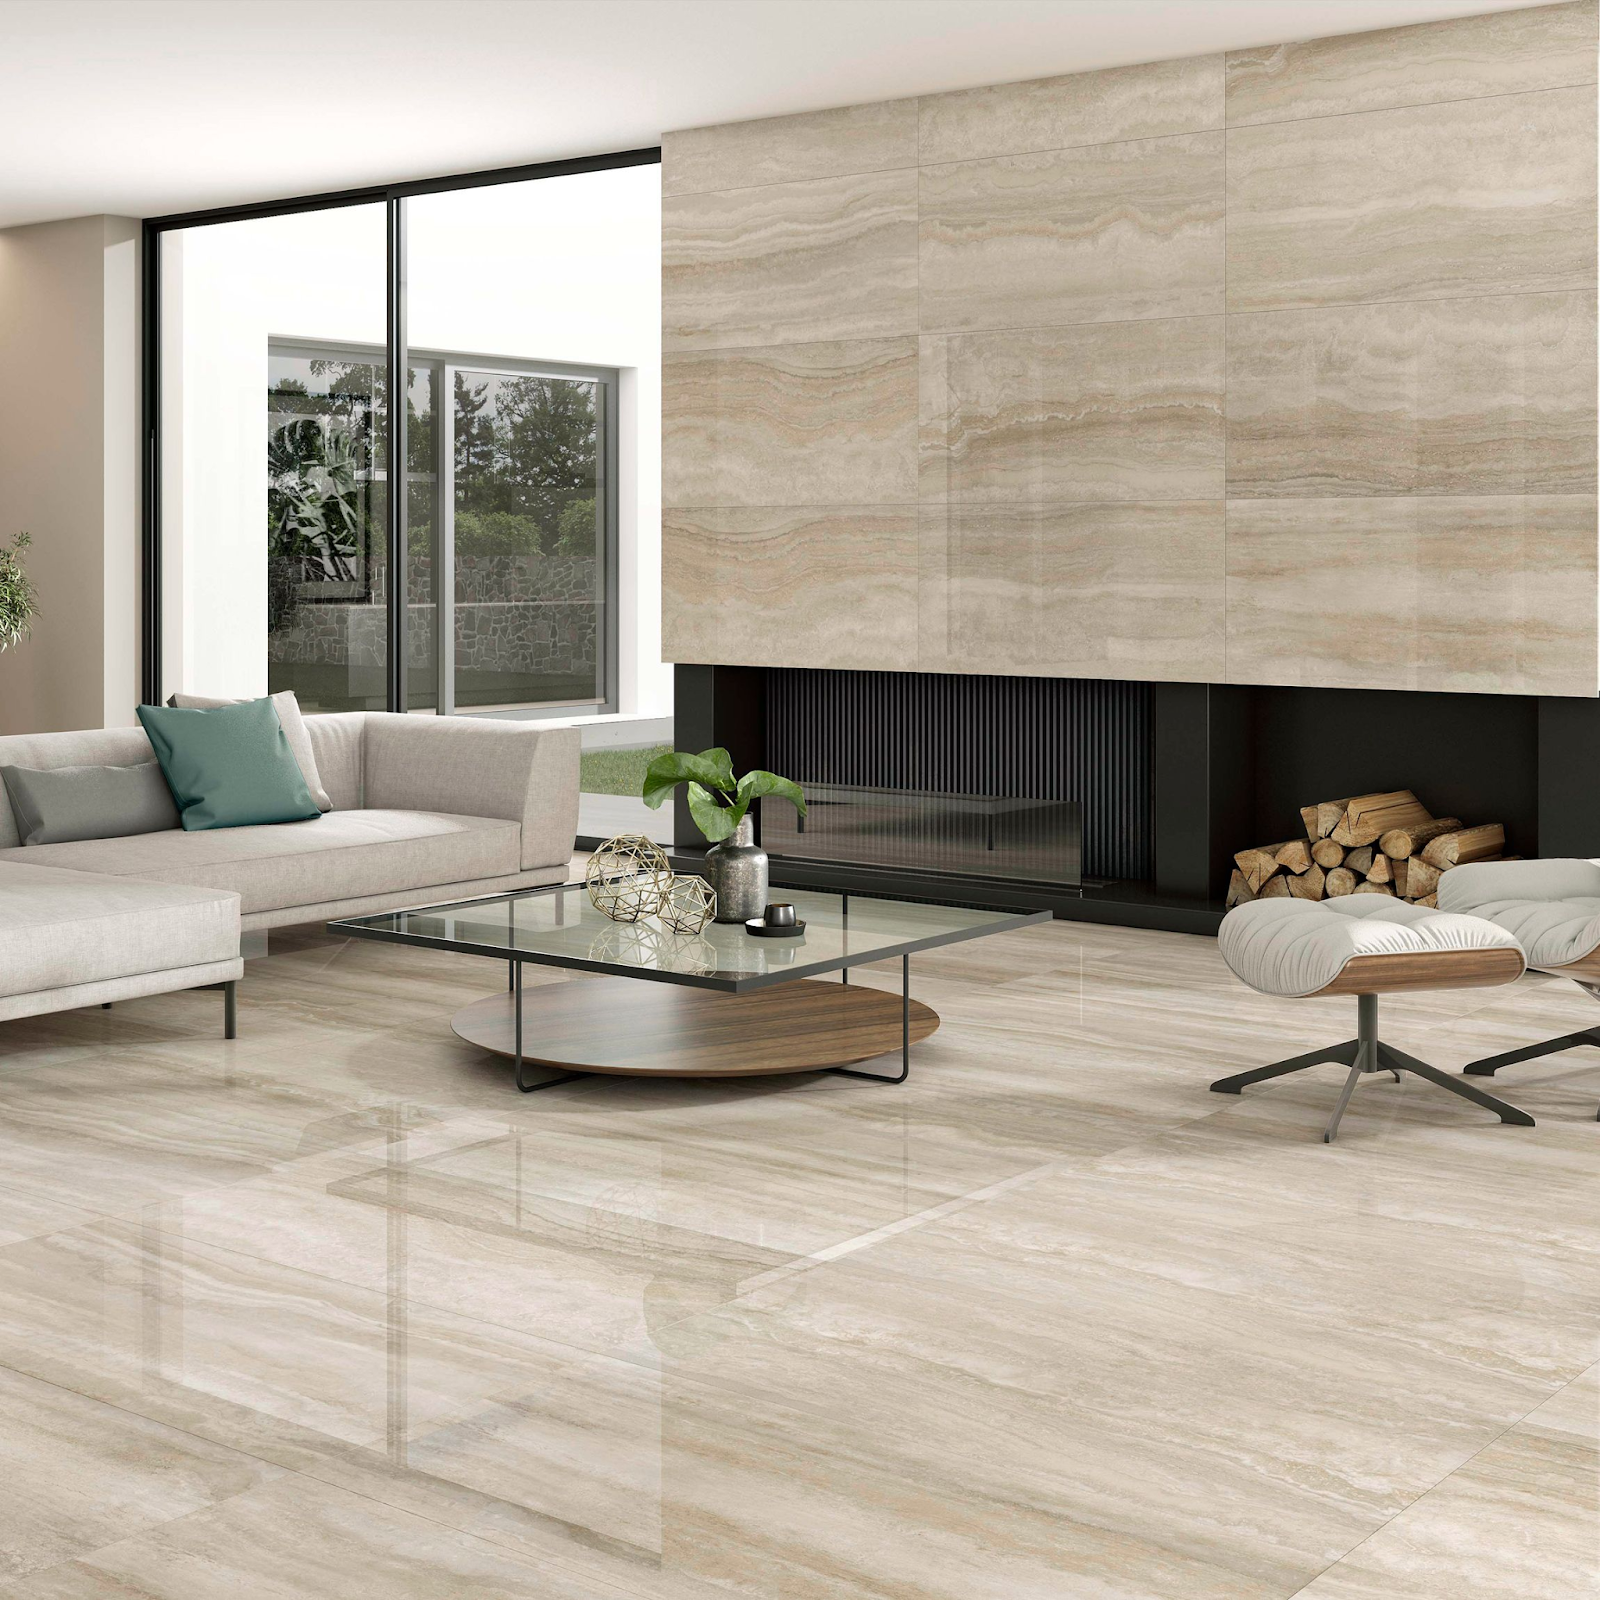 Is Travertine The New Marble?